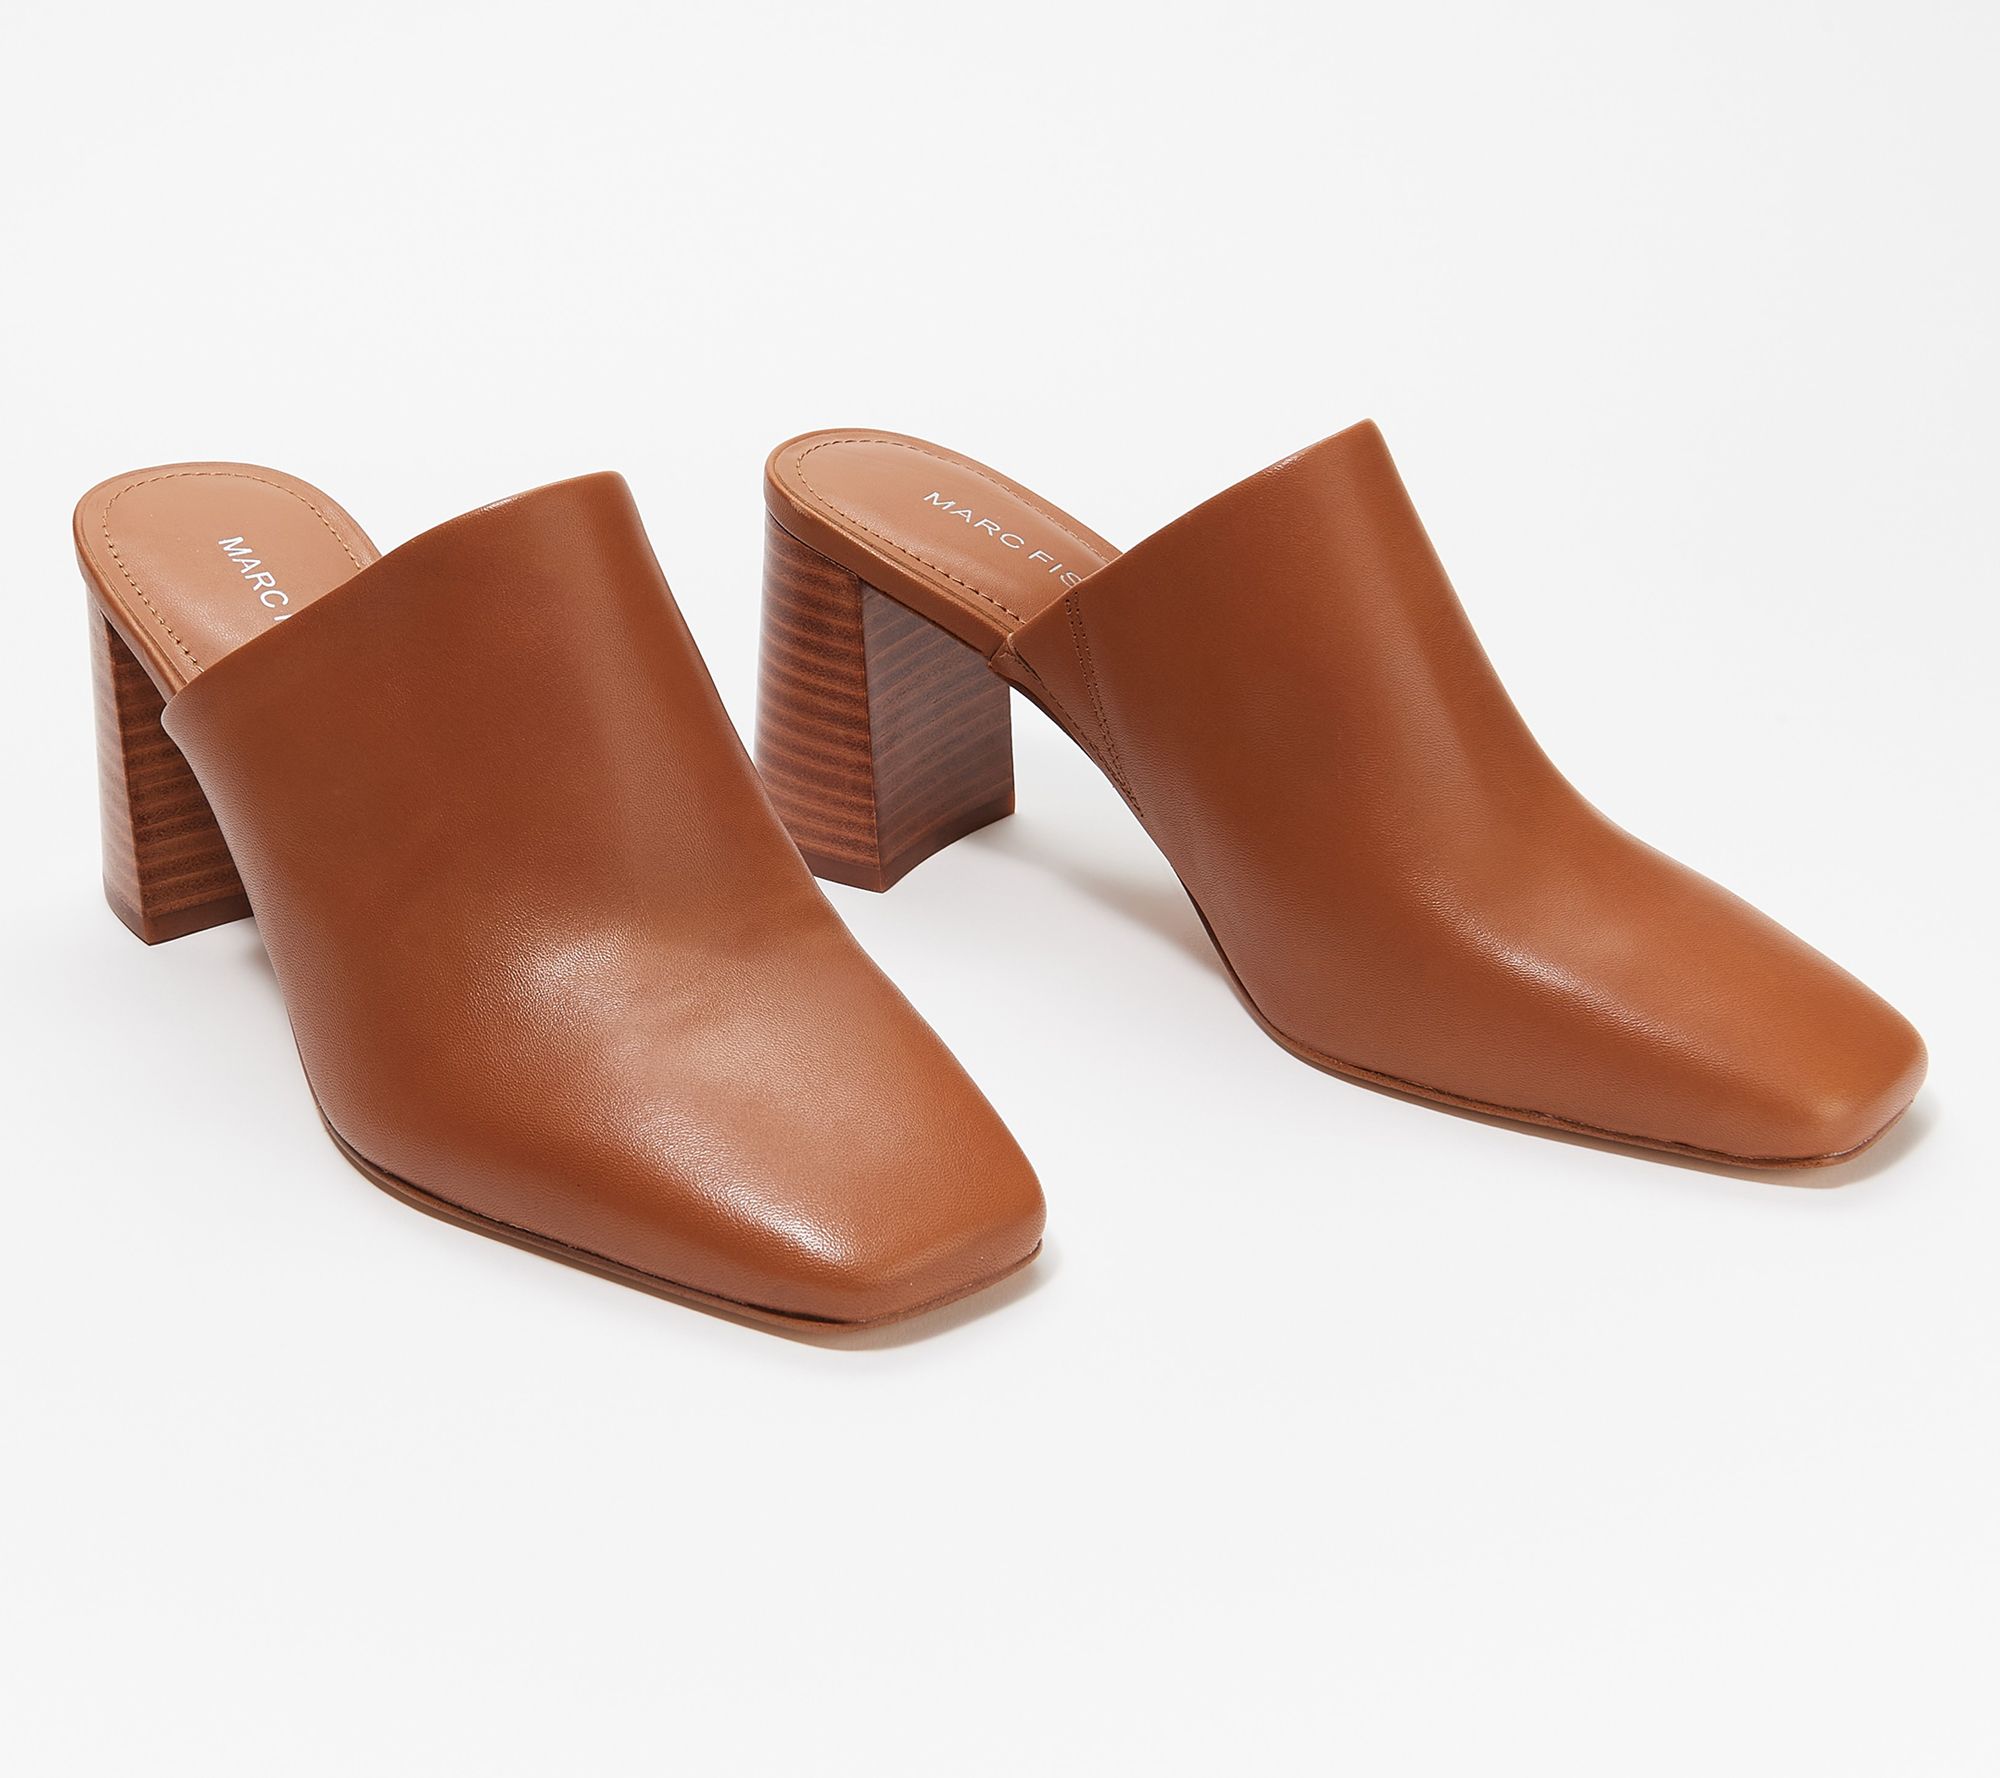 Marc Fisher Leather Heeled Mules - Fanna - QVC.com